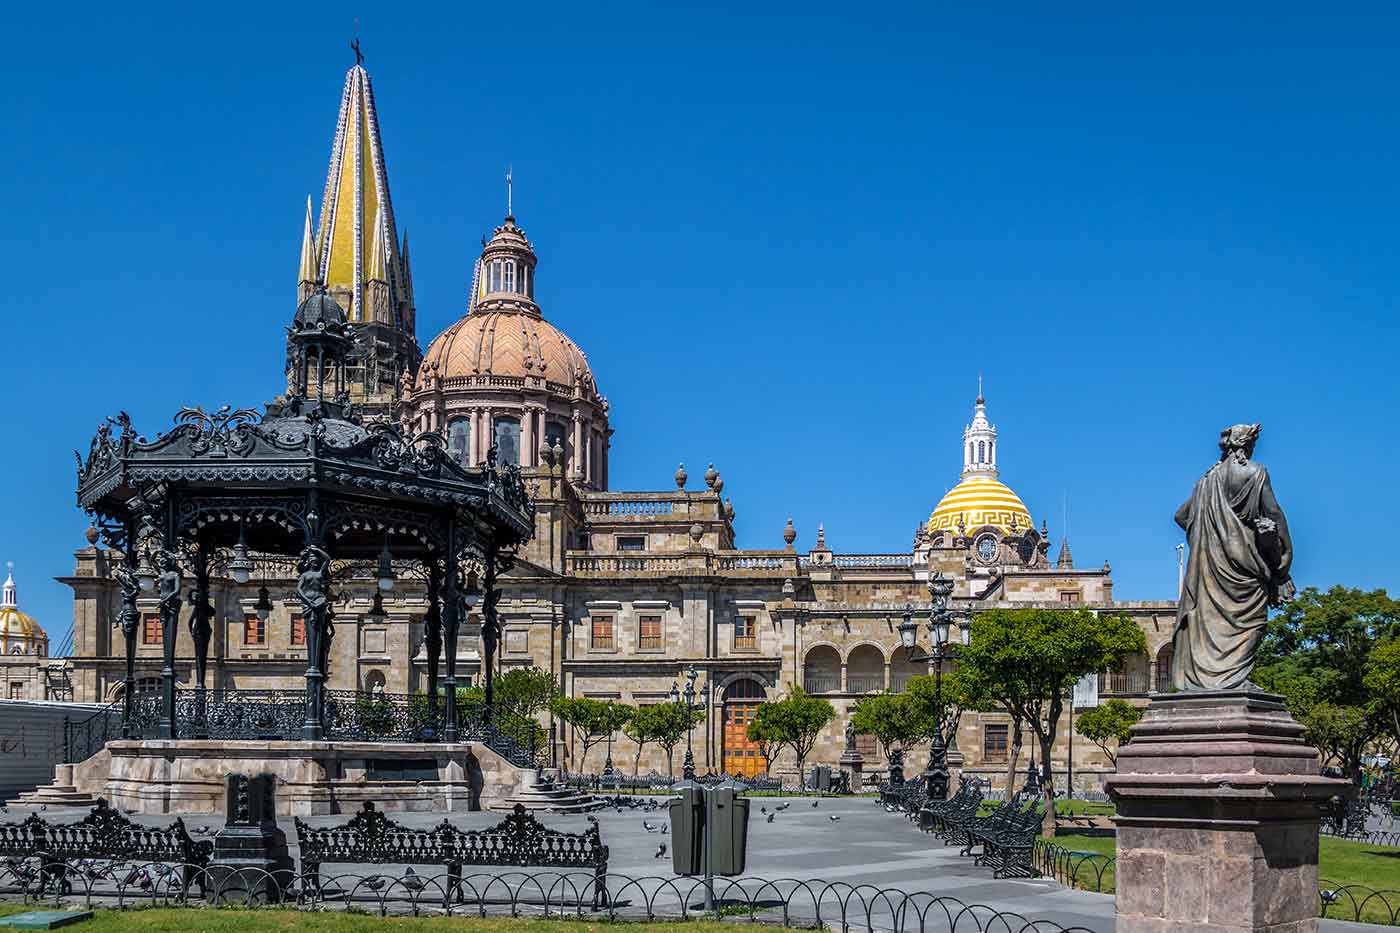 12 Things to Do in Guadalajara, Mexico - Top Places to Visit in GDL